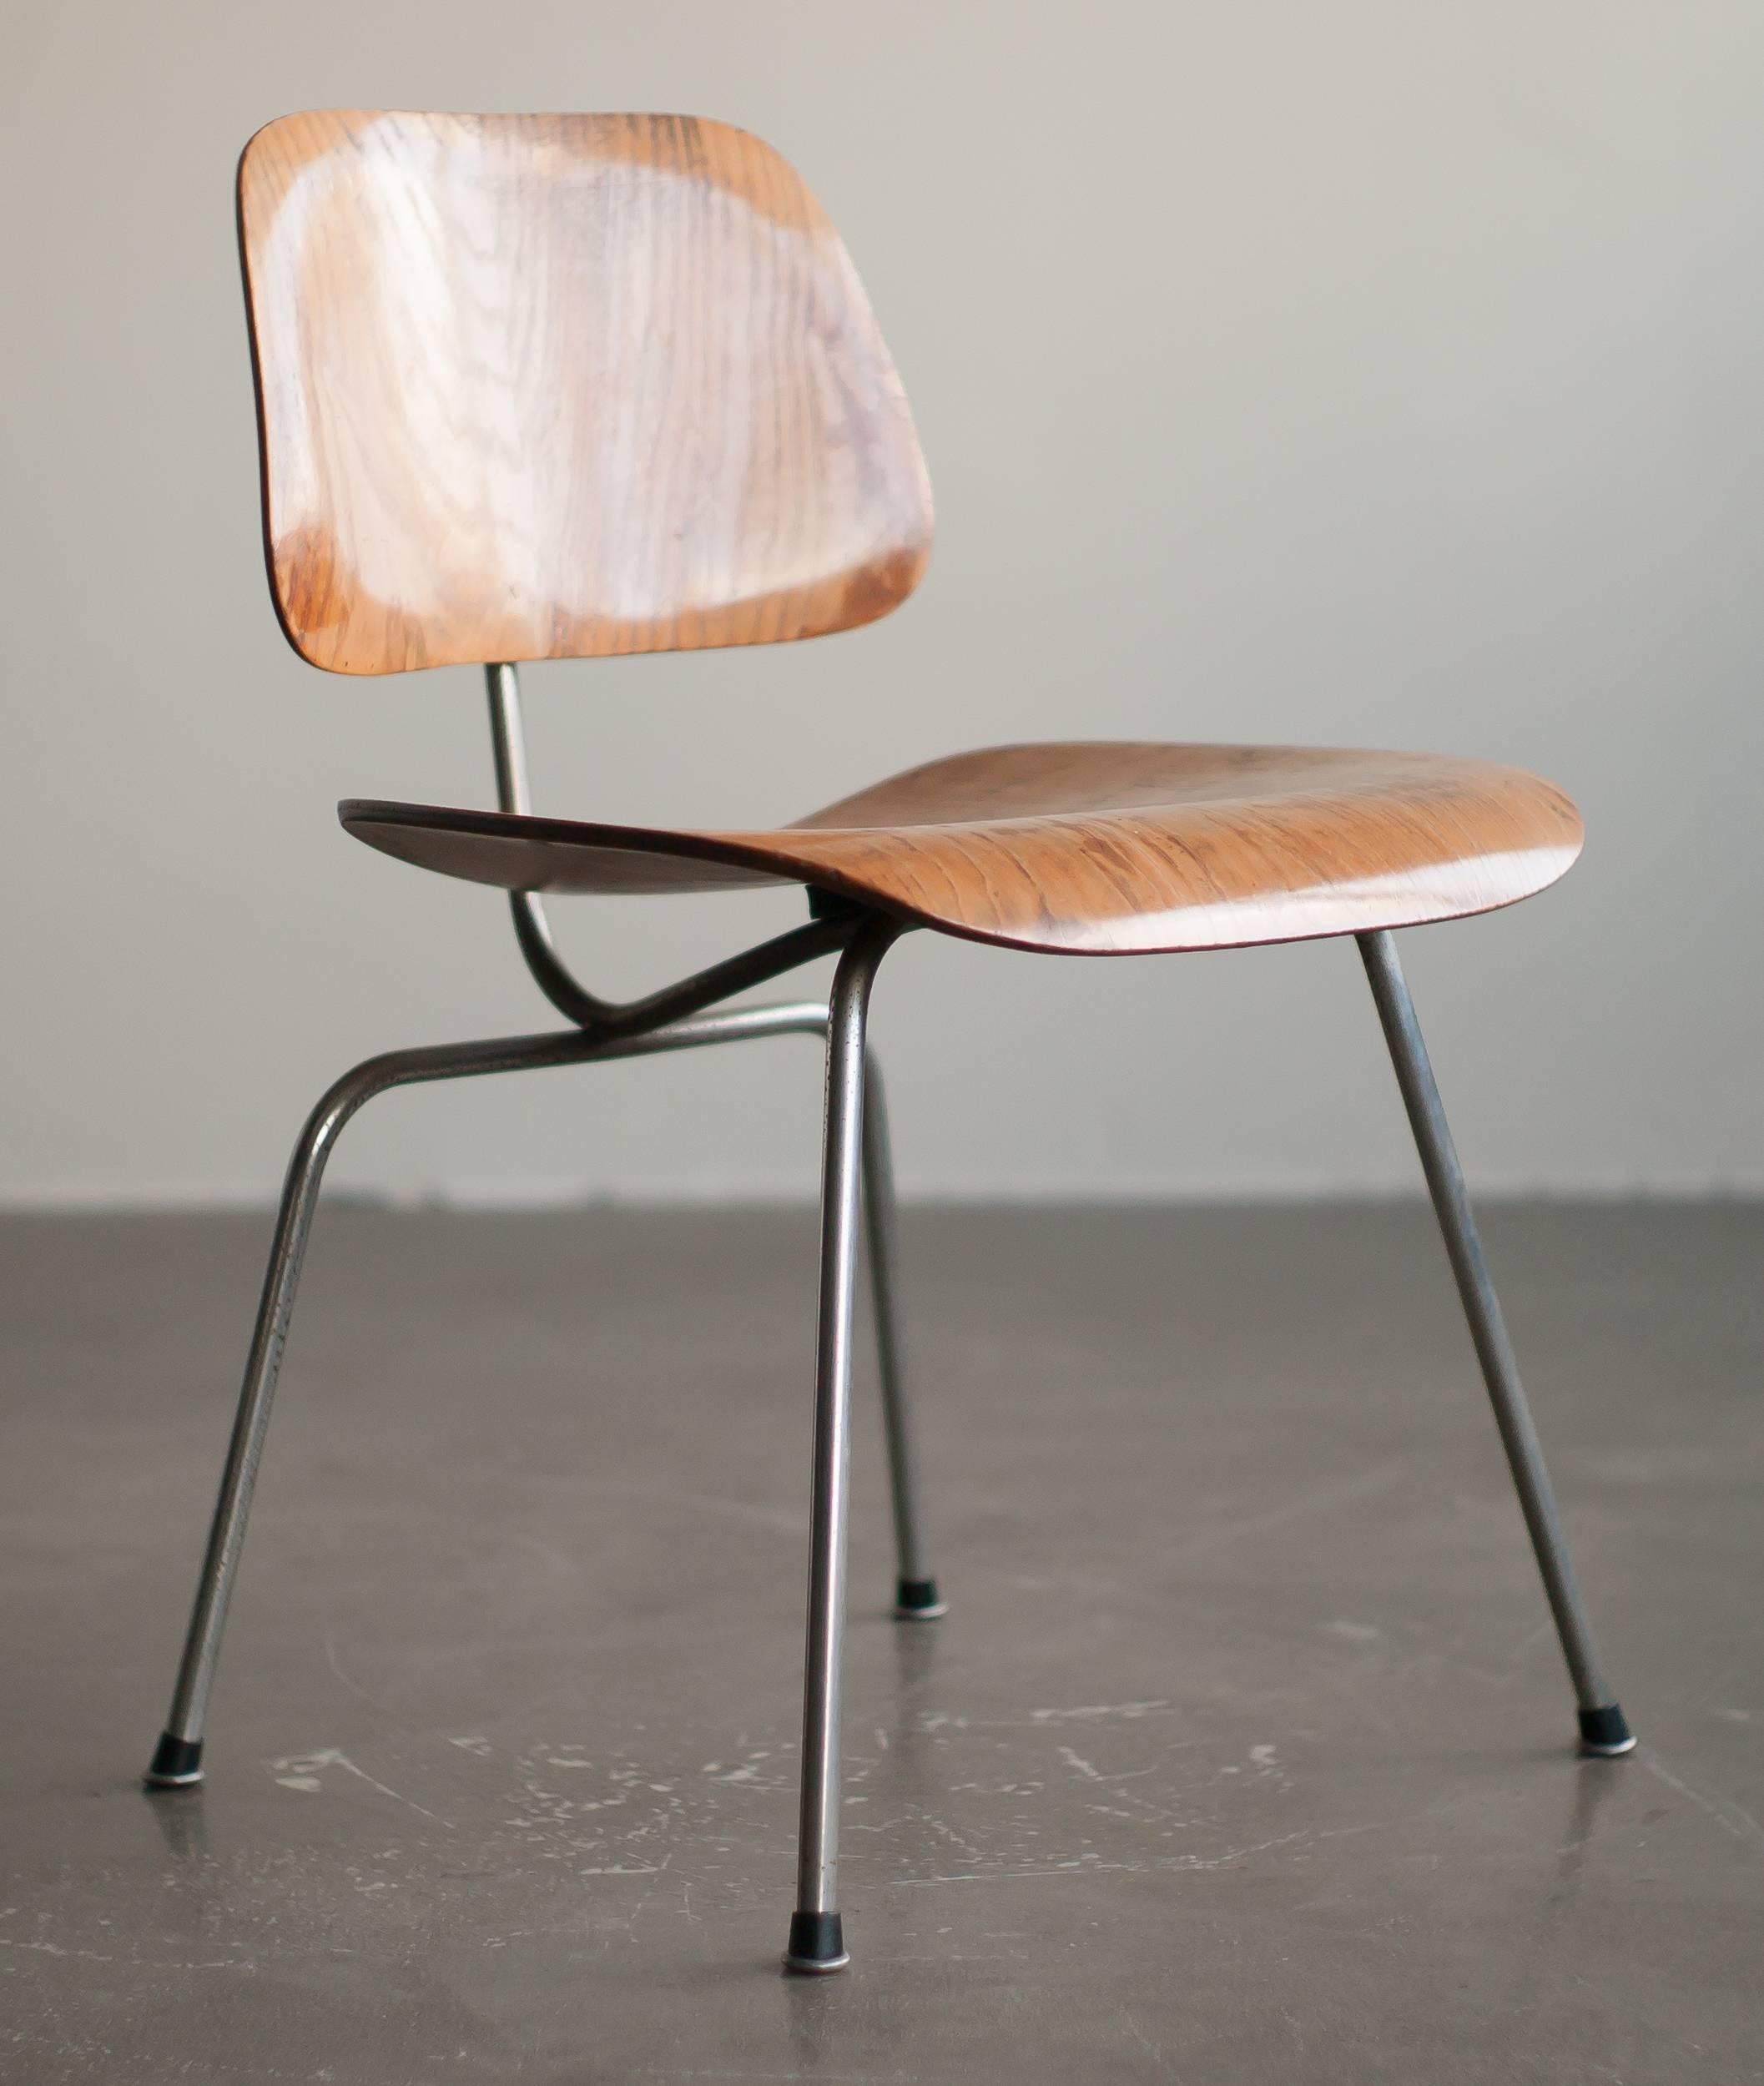 Early Charles Eames for Evans Products Company molded plywood dining chair, stunning ash grain with wonderful patina. Early sock glides and large forged mounting tabs signifying an Evans production. Marked with Evans for Herman Miller